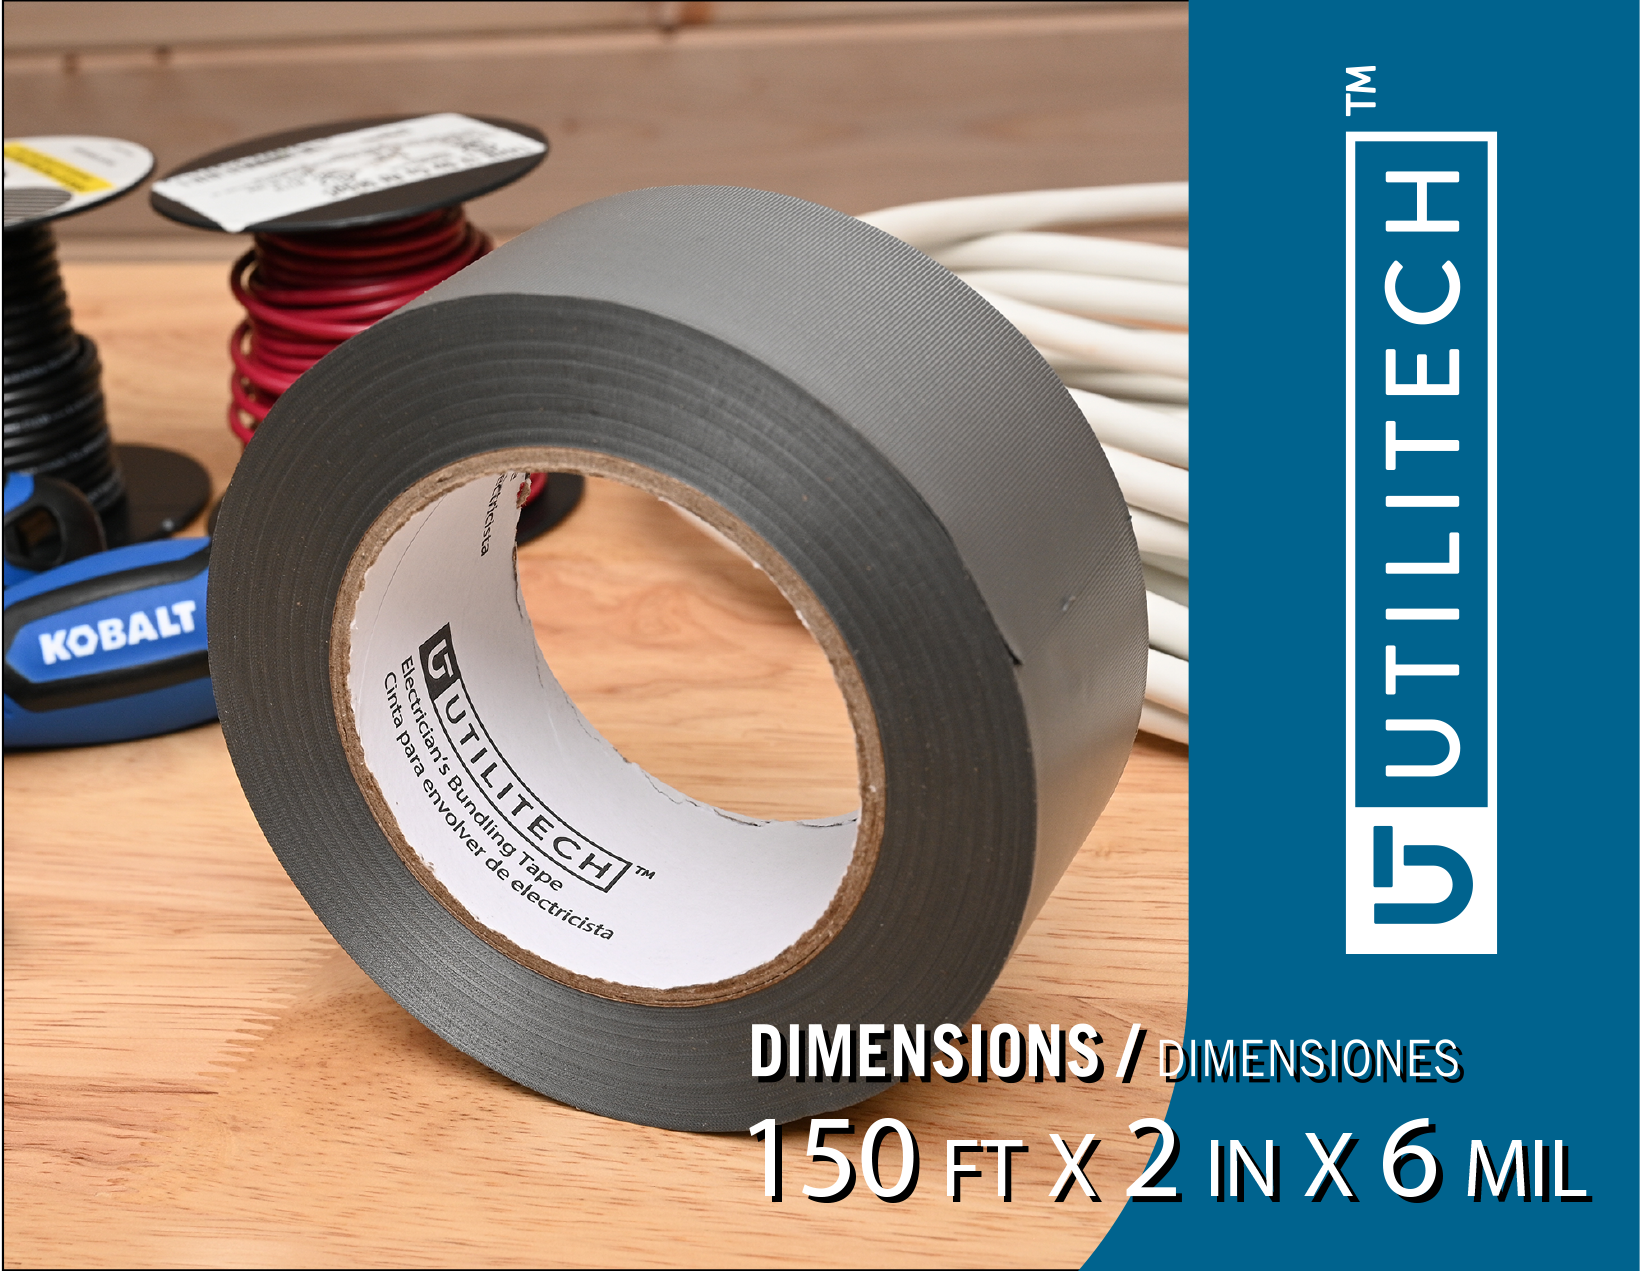 ELK 2-in x 33-ft Glass Cloth Electrical Tape Copper in the Electrical Tape  department at